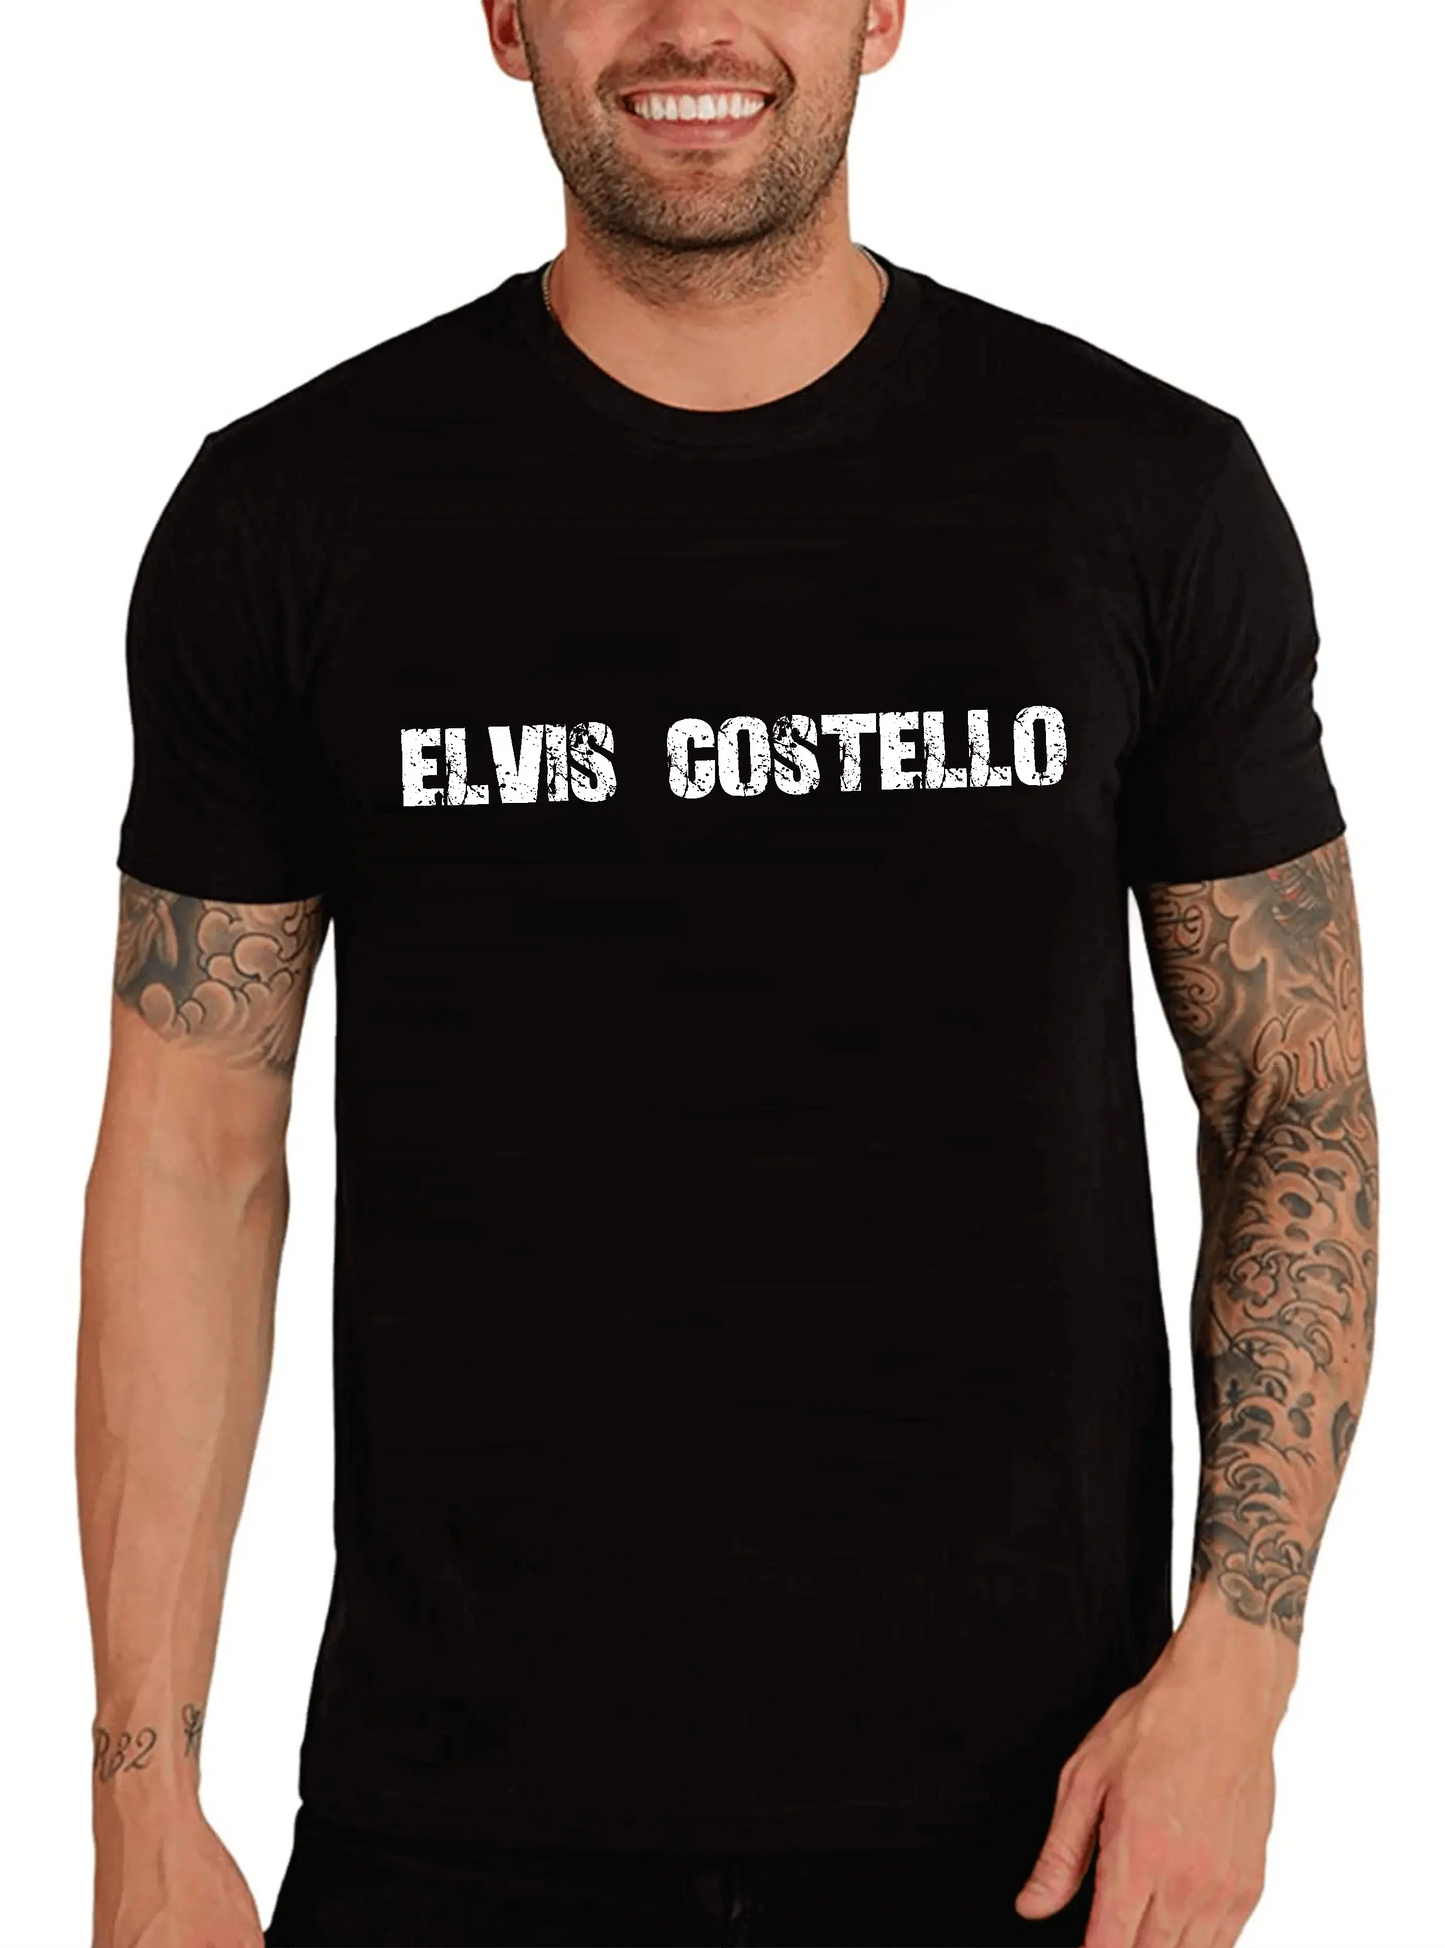 Men's Graphic T-Shirt Elvis Costello Eco-Friendly Limited Edition Short Sleeve Tee-Shirt Vintage Birthday Gift Novelty